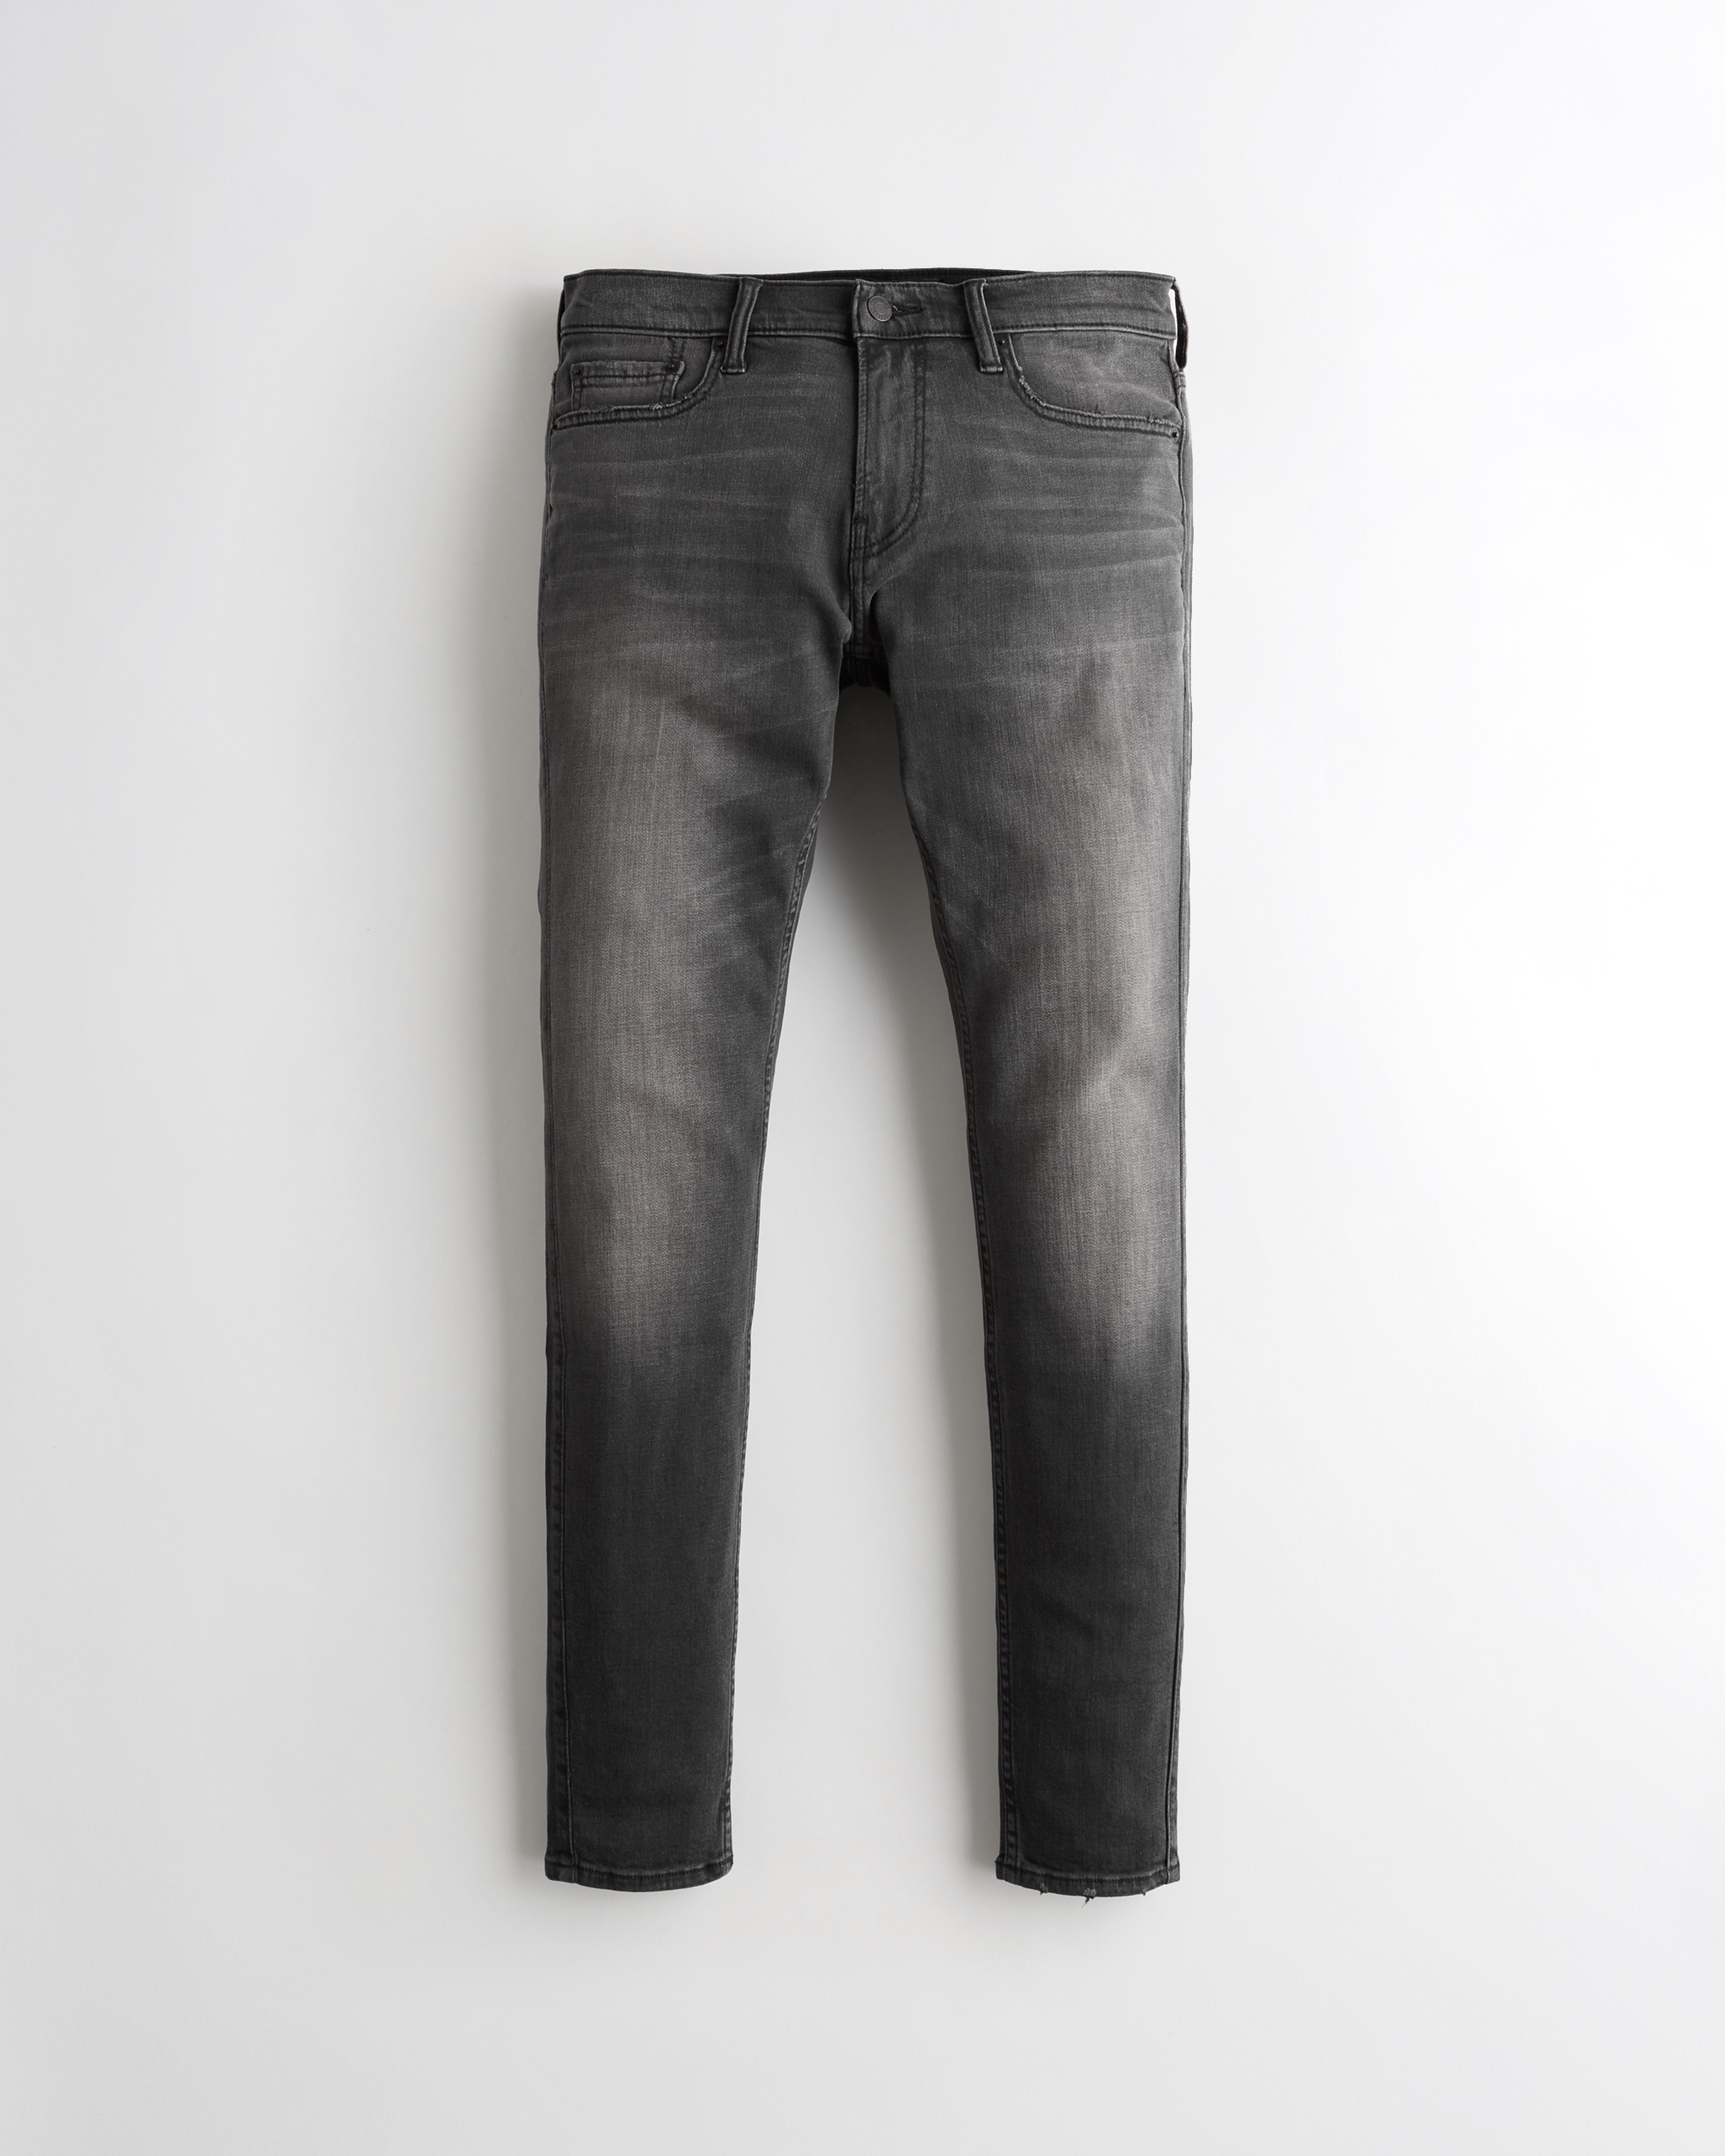 hollister extreme skinny jeans